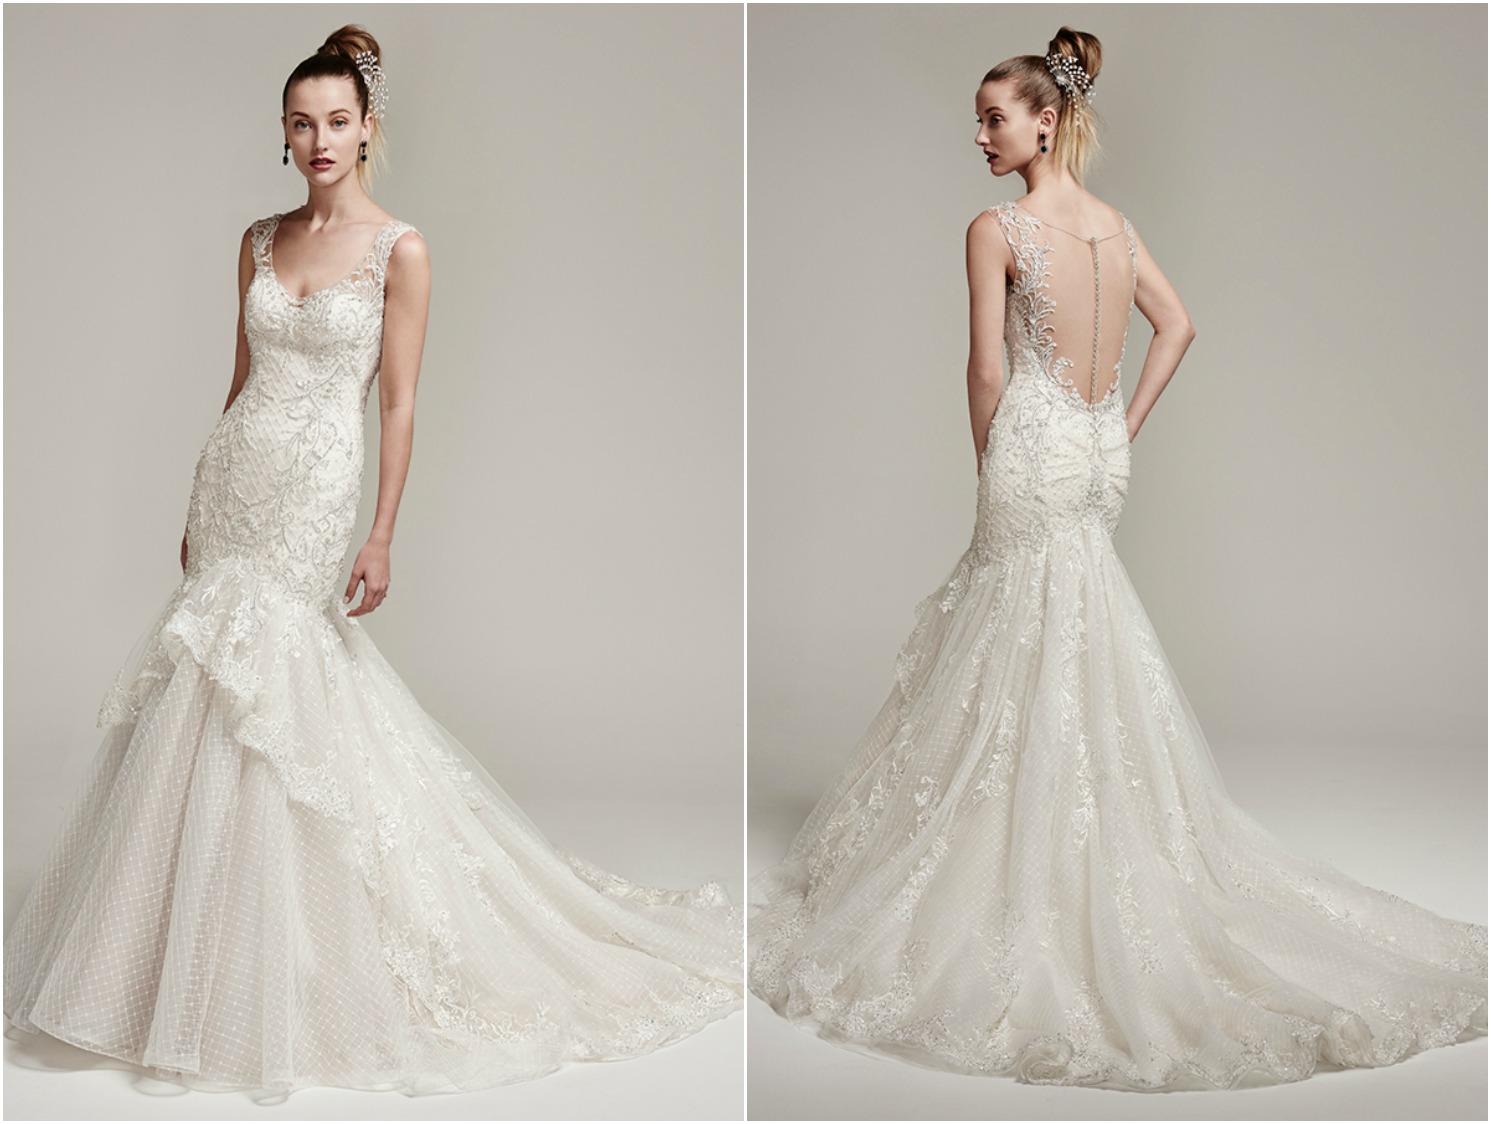 Crosshatch tulle adds artistic dimension to this show-stopping fit and flare wedding dress featuring illusion lace scoop neckline and straps. Complete with ruffled flared skirt and luxurious Swarovski crystals. Finished with dramatic illusion back and crystal buttons over zipper closure. 

<a href="https://www.maggiesottero.com/sottero-and-midgley/zanetta/9893" target="_blank">Sottero &amp; Midgley</a>